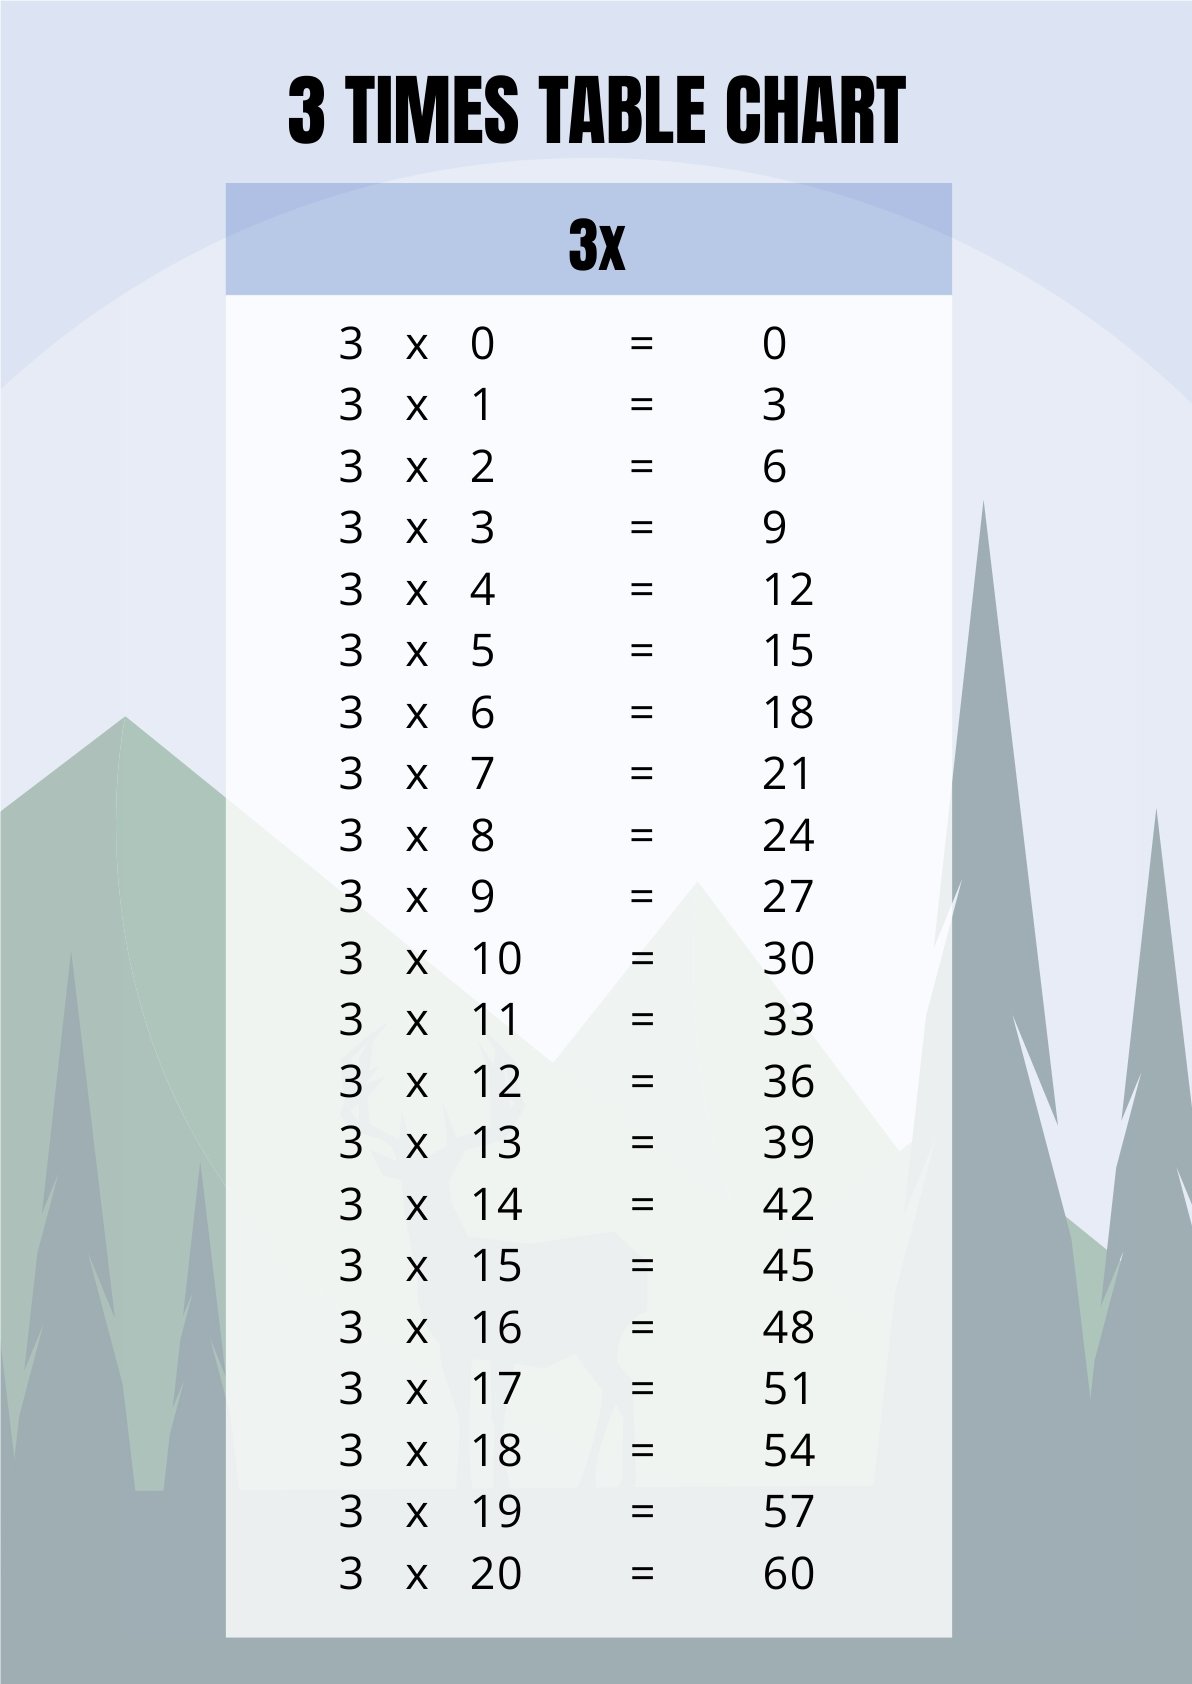 3 Times Table Chart